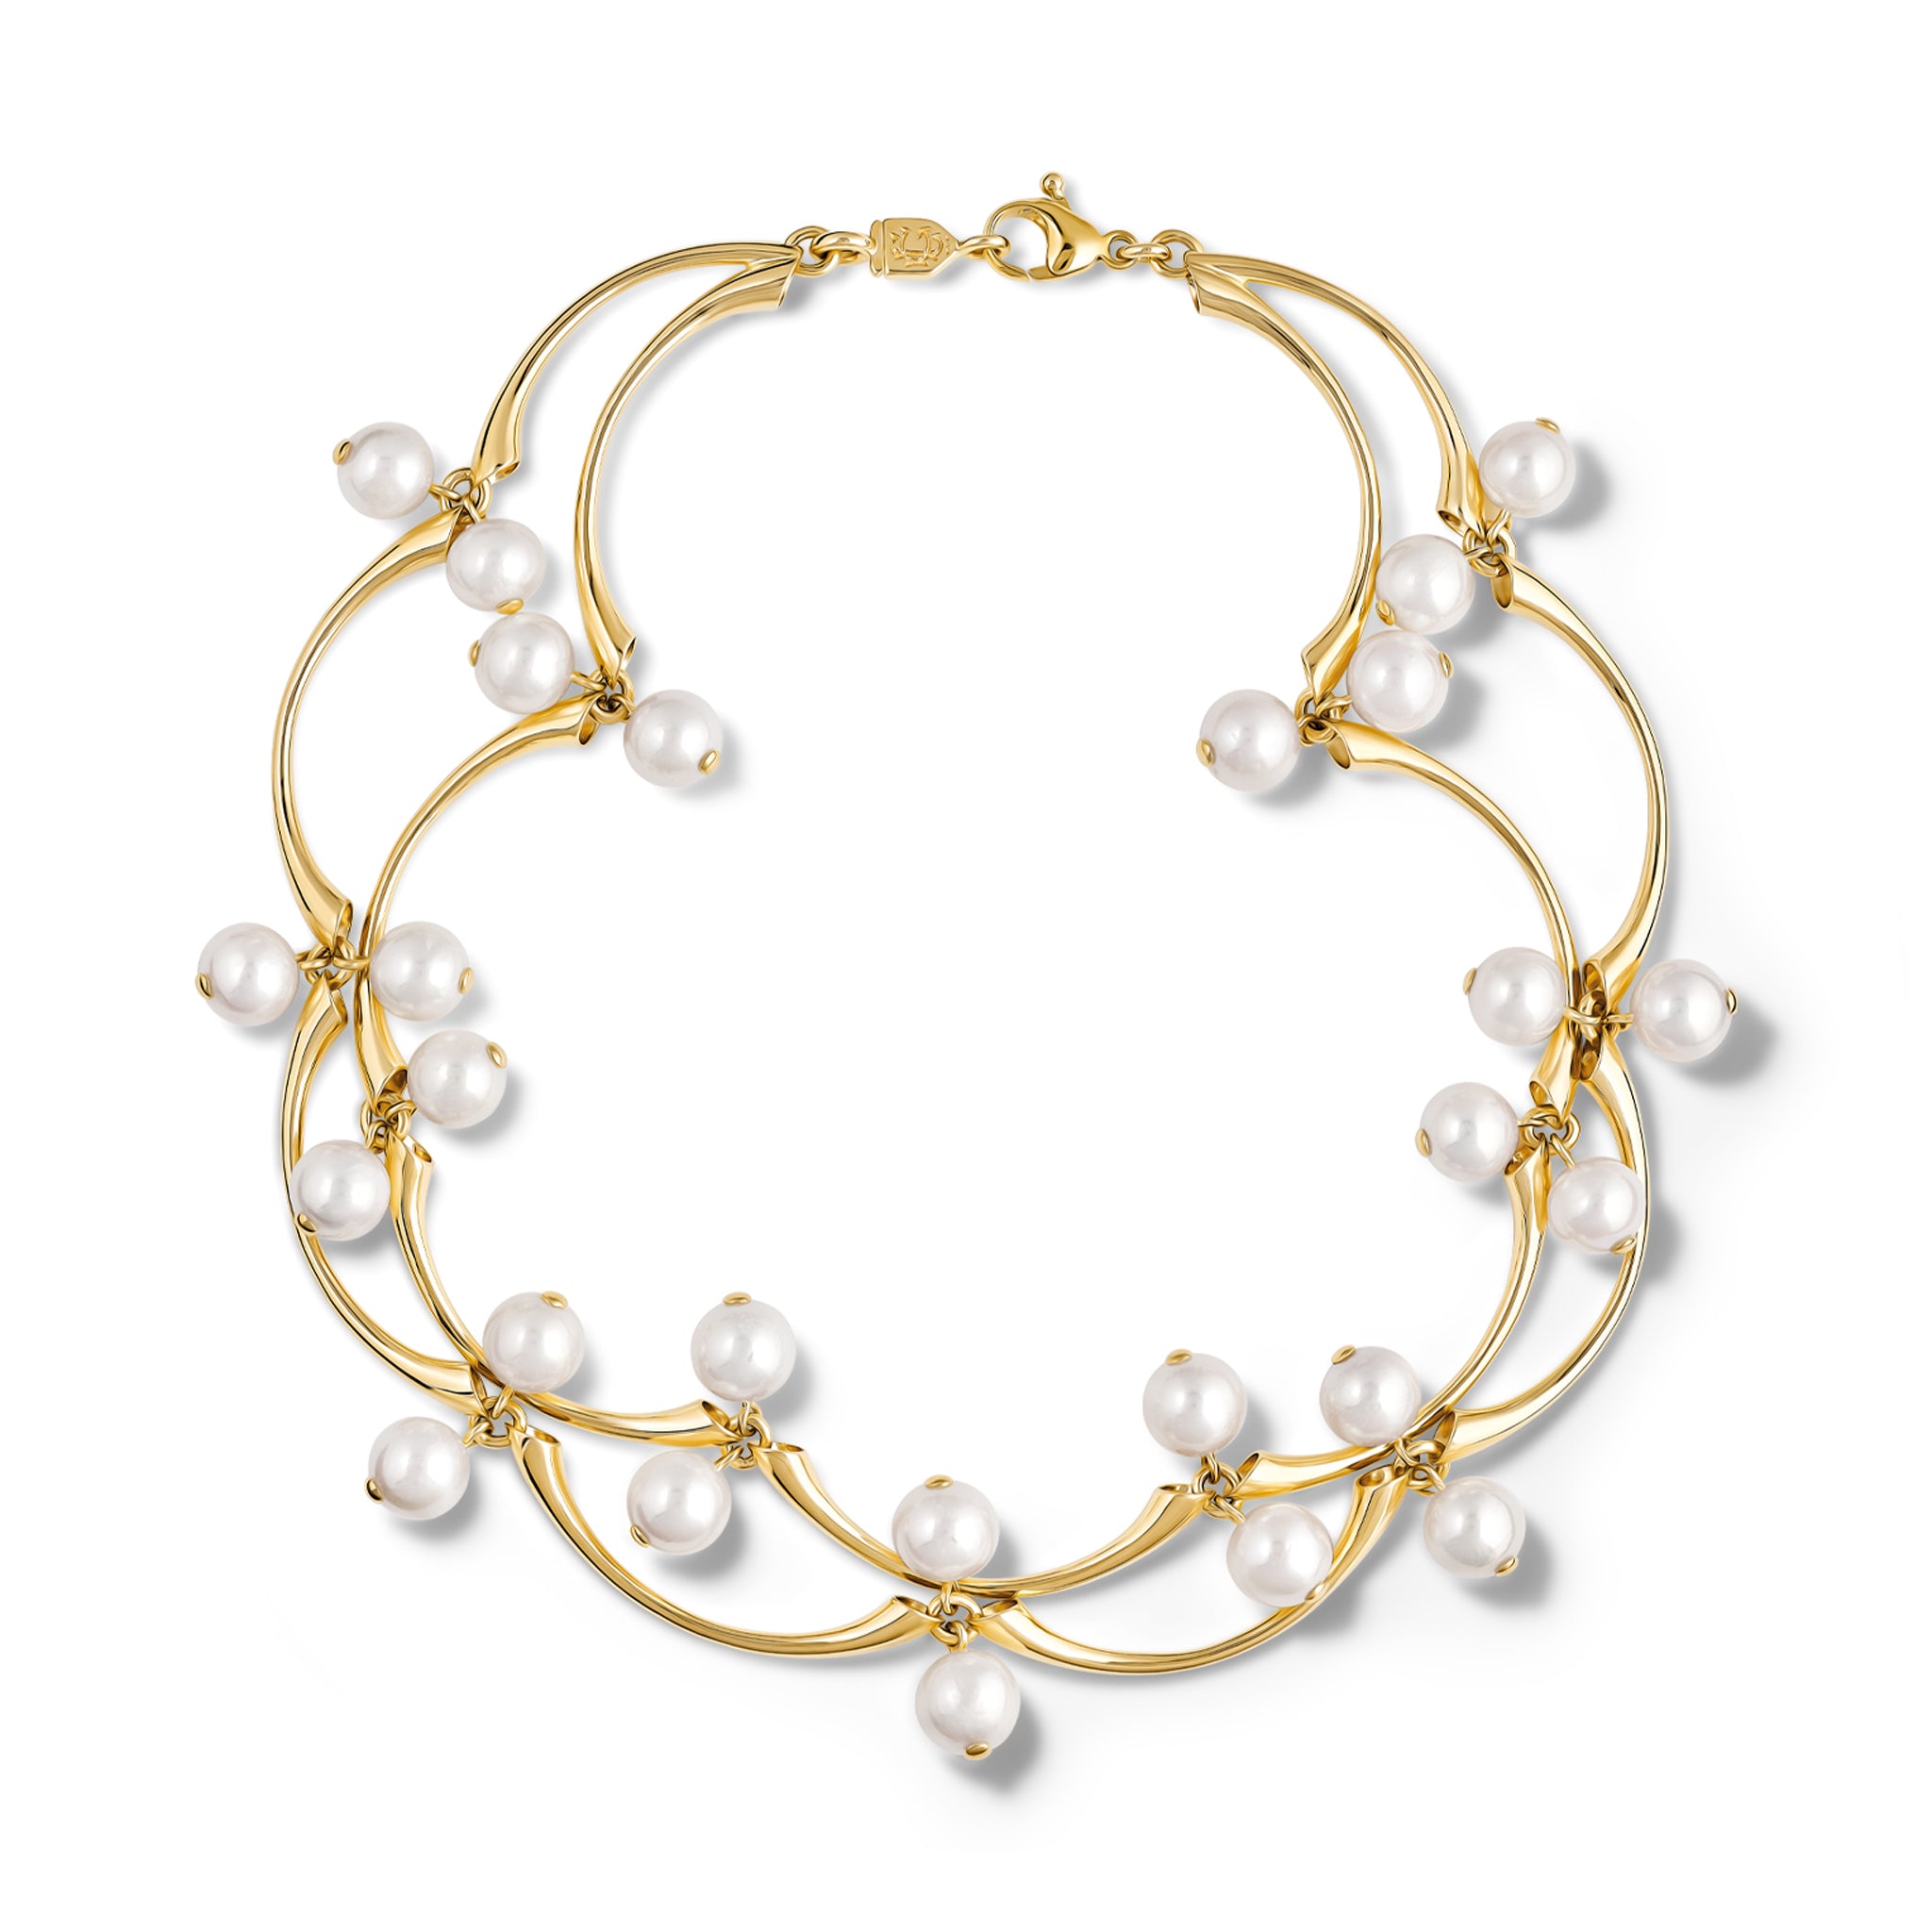 Kerala Necklace Yellow Gold - Pearl